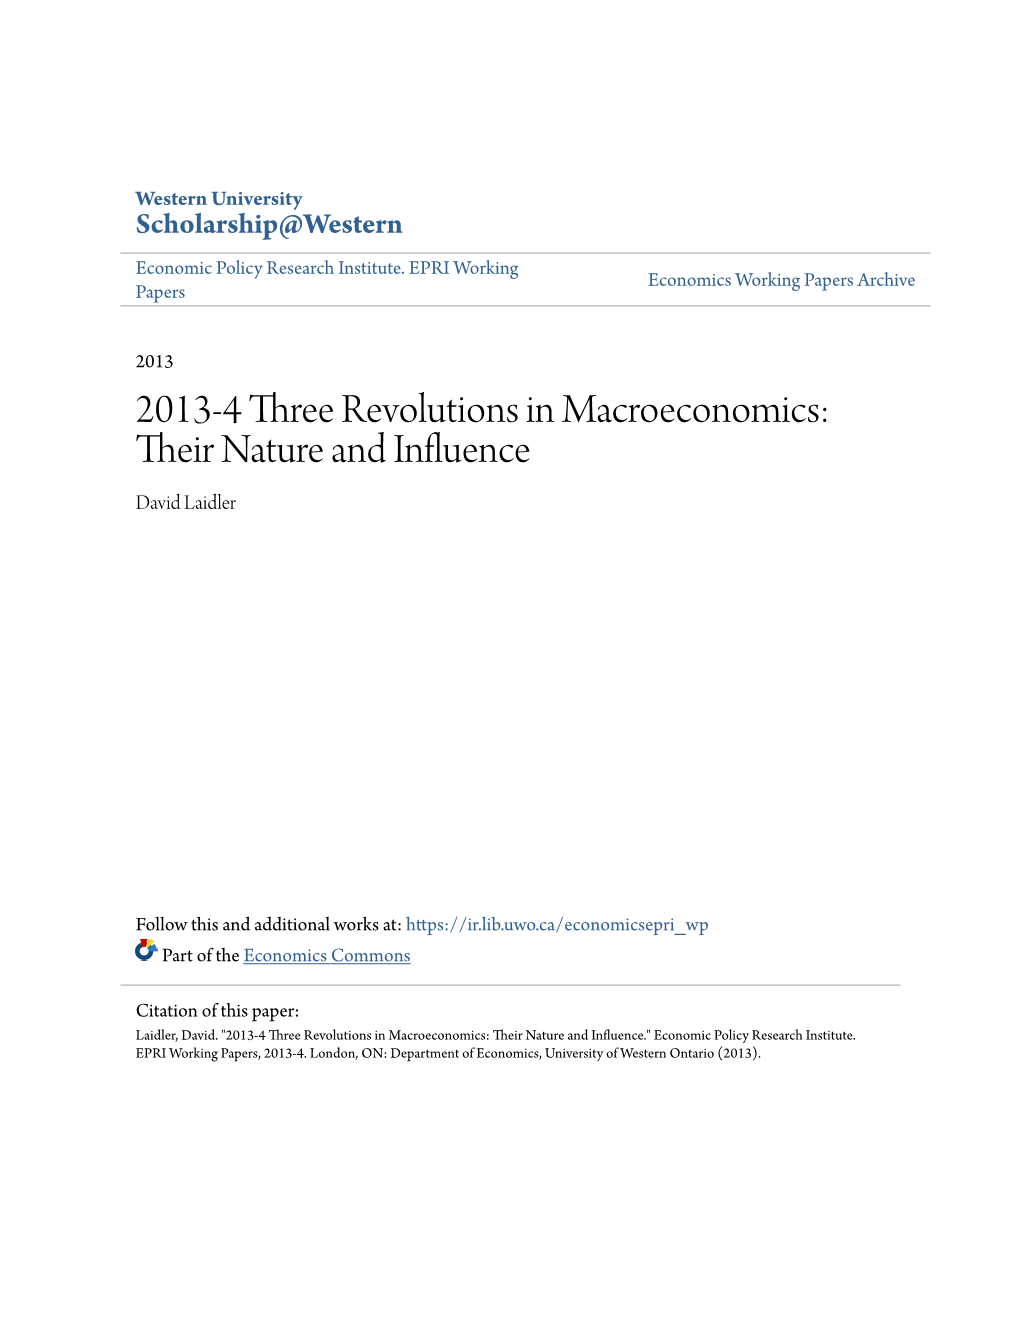 2013-4 Three Revolutions in Macroeconomics: Their an Ture and Influence David Laidler